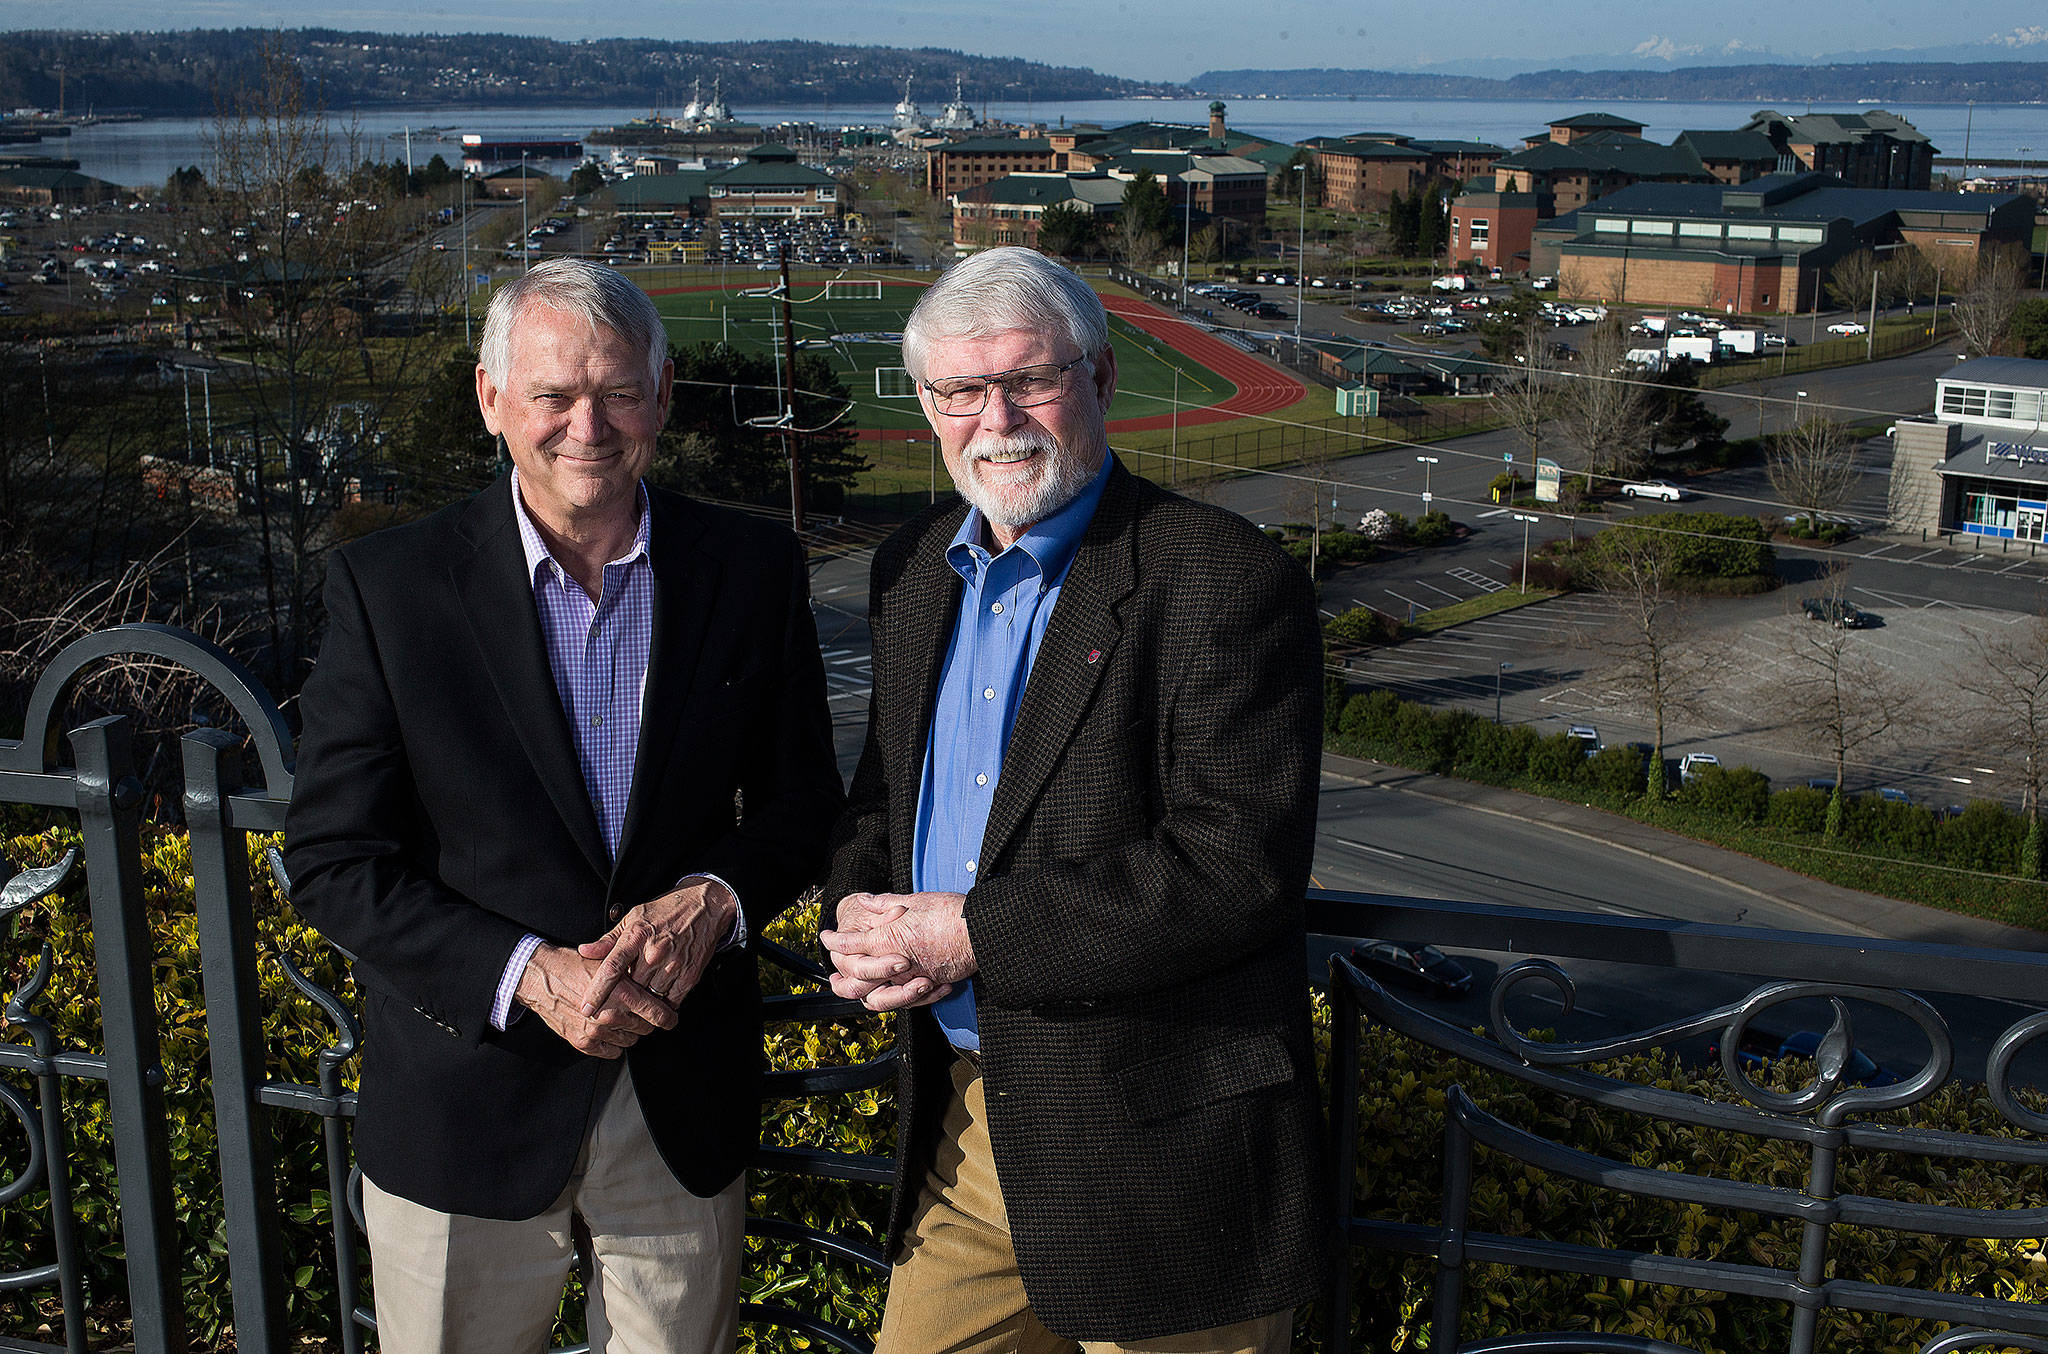 Paul Roberts and Pat McClain helped the City of Everett convince the Navy to build a base, now known as Naval Station Everett, in Everett. The base is celebrating 25 years on the Everett waterfront. (Andy Bronson / The Herald)